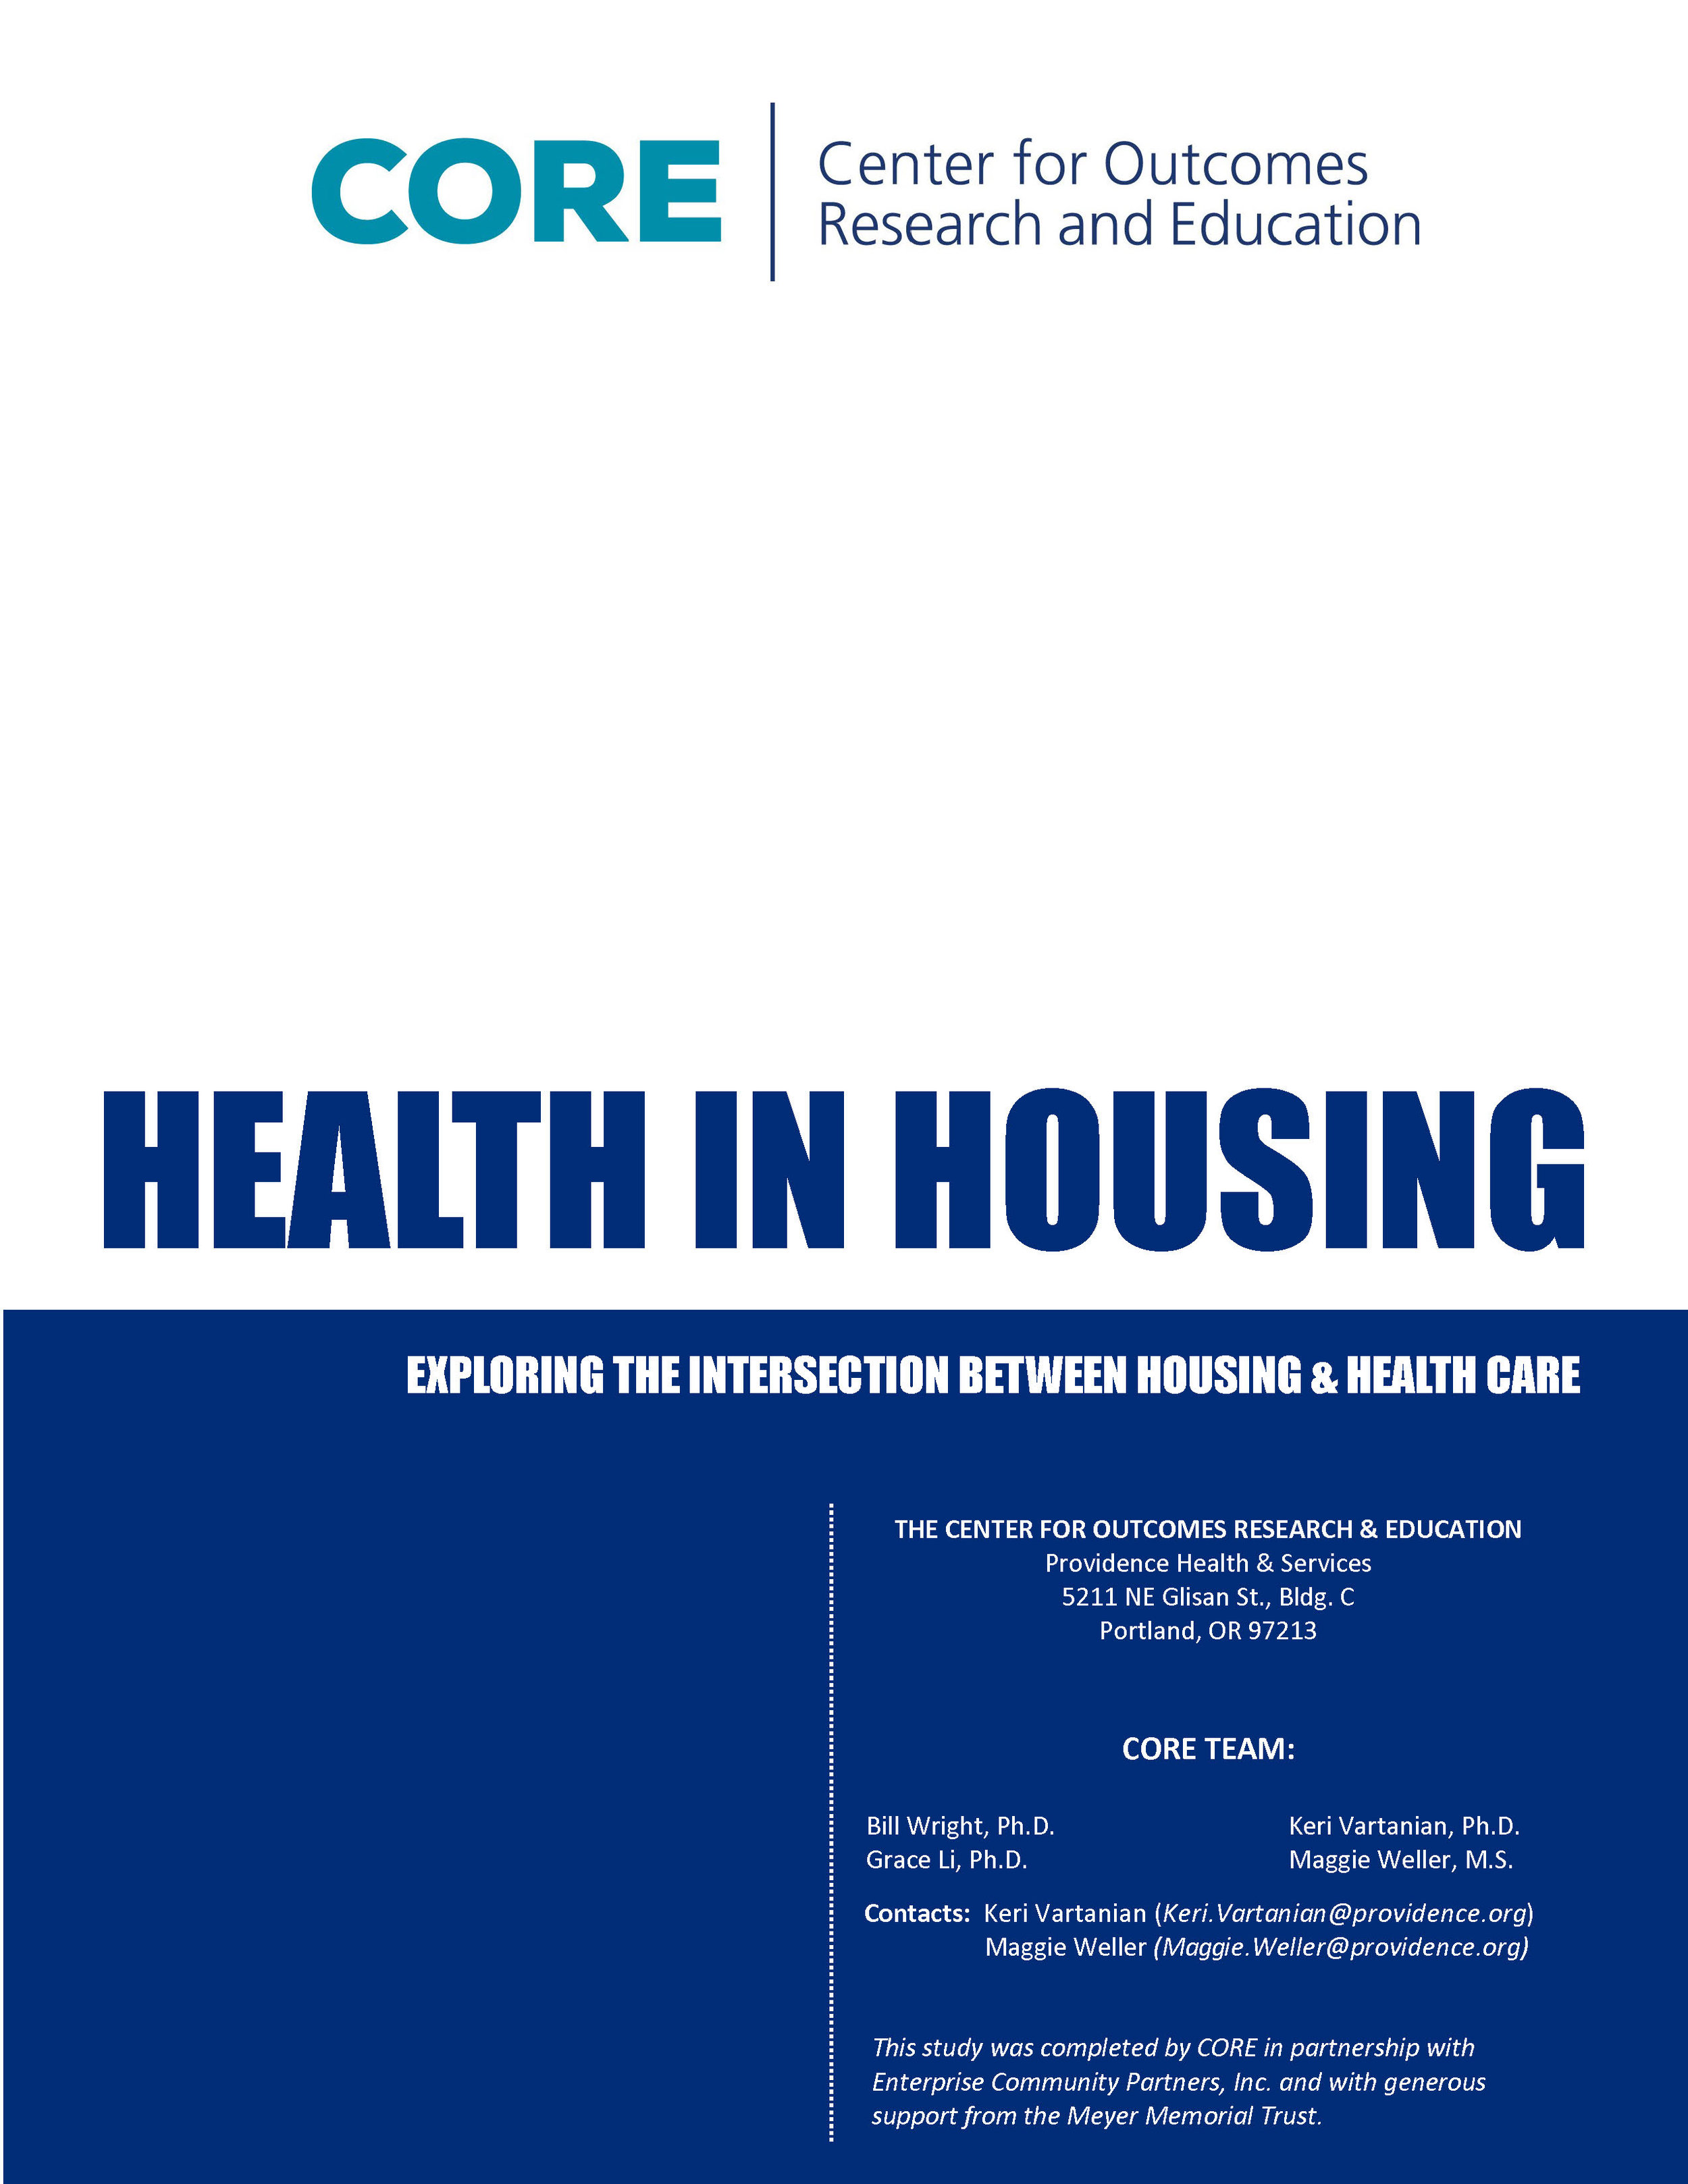 Health in Housing Report, February 2016